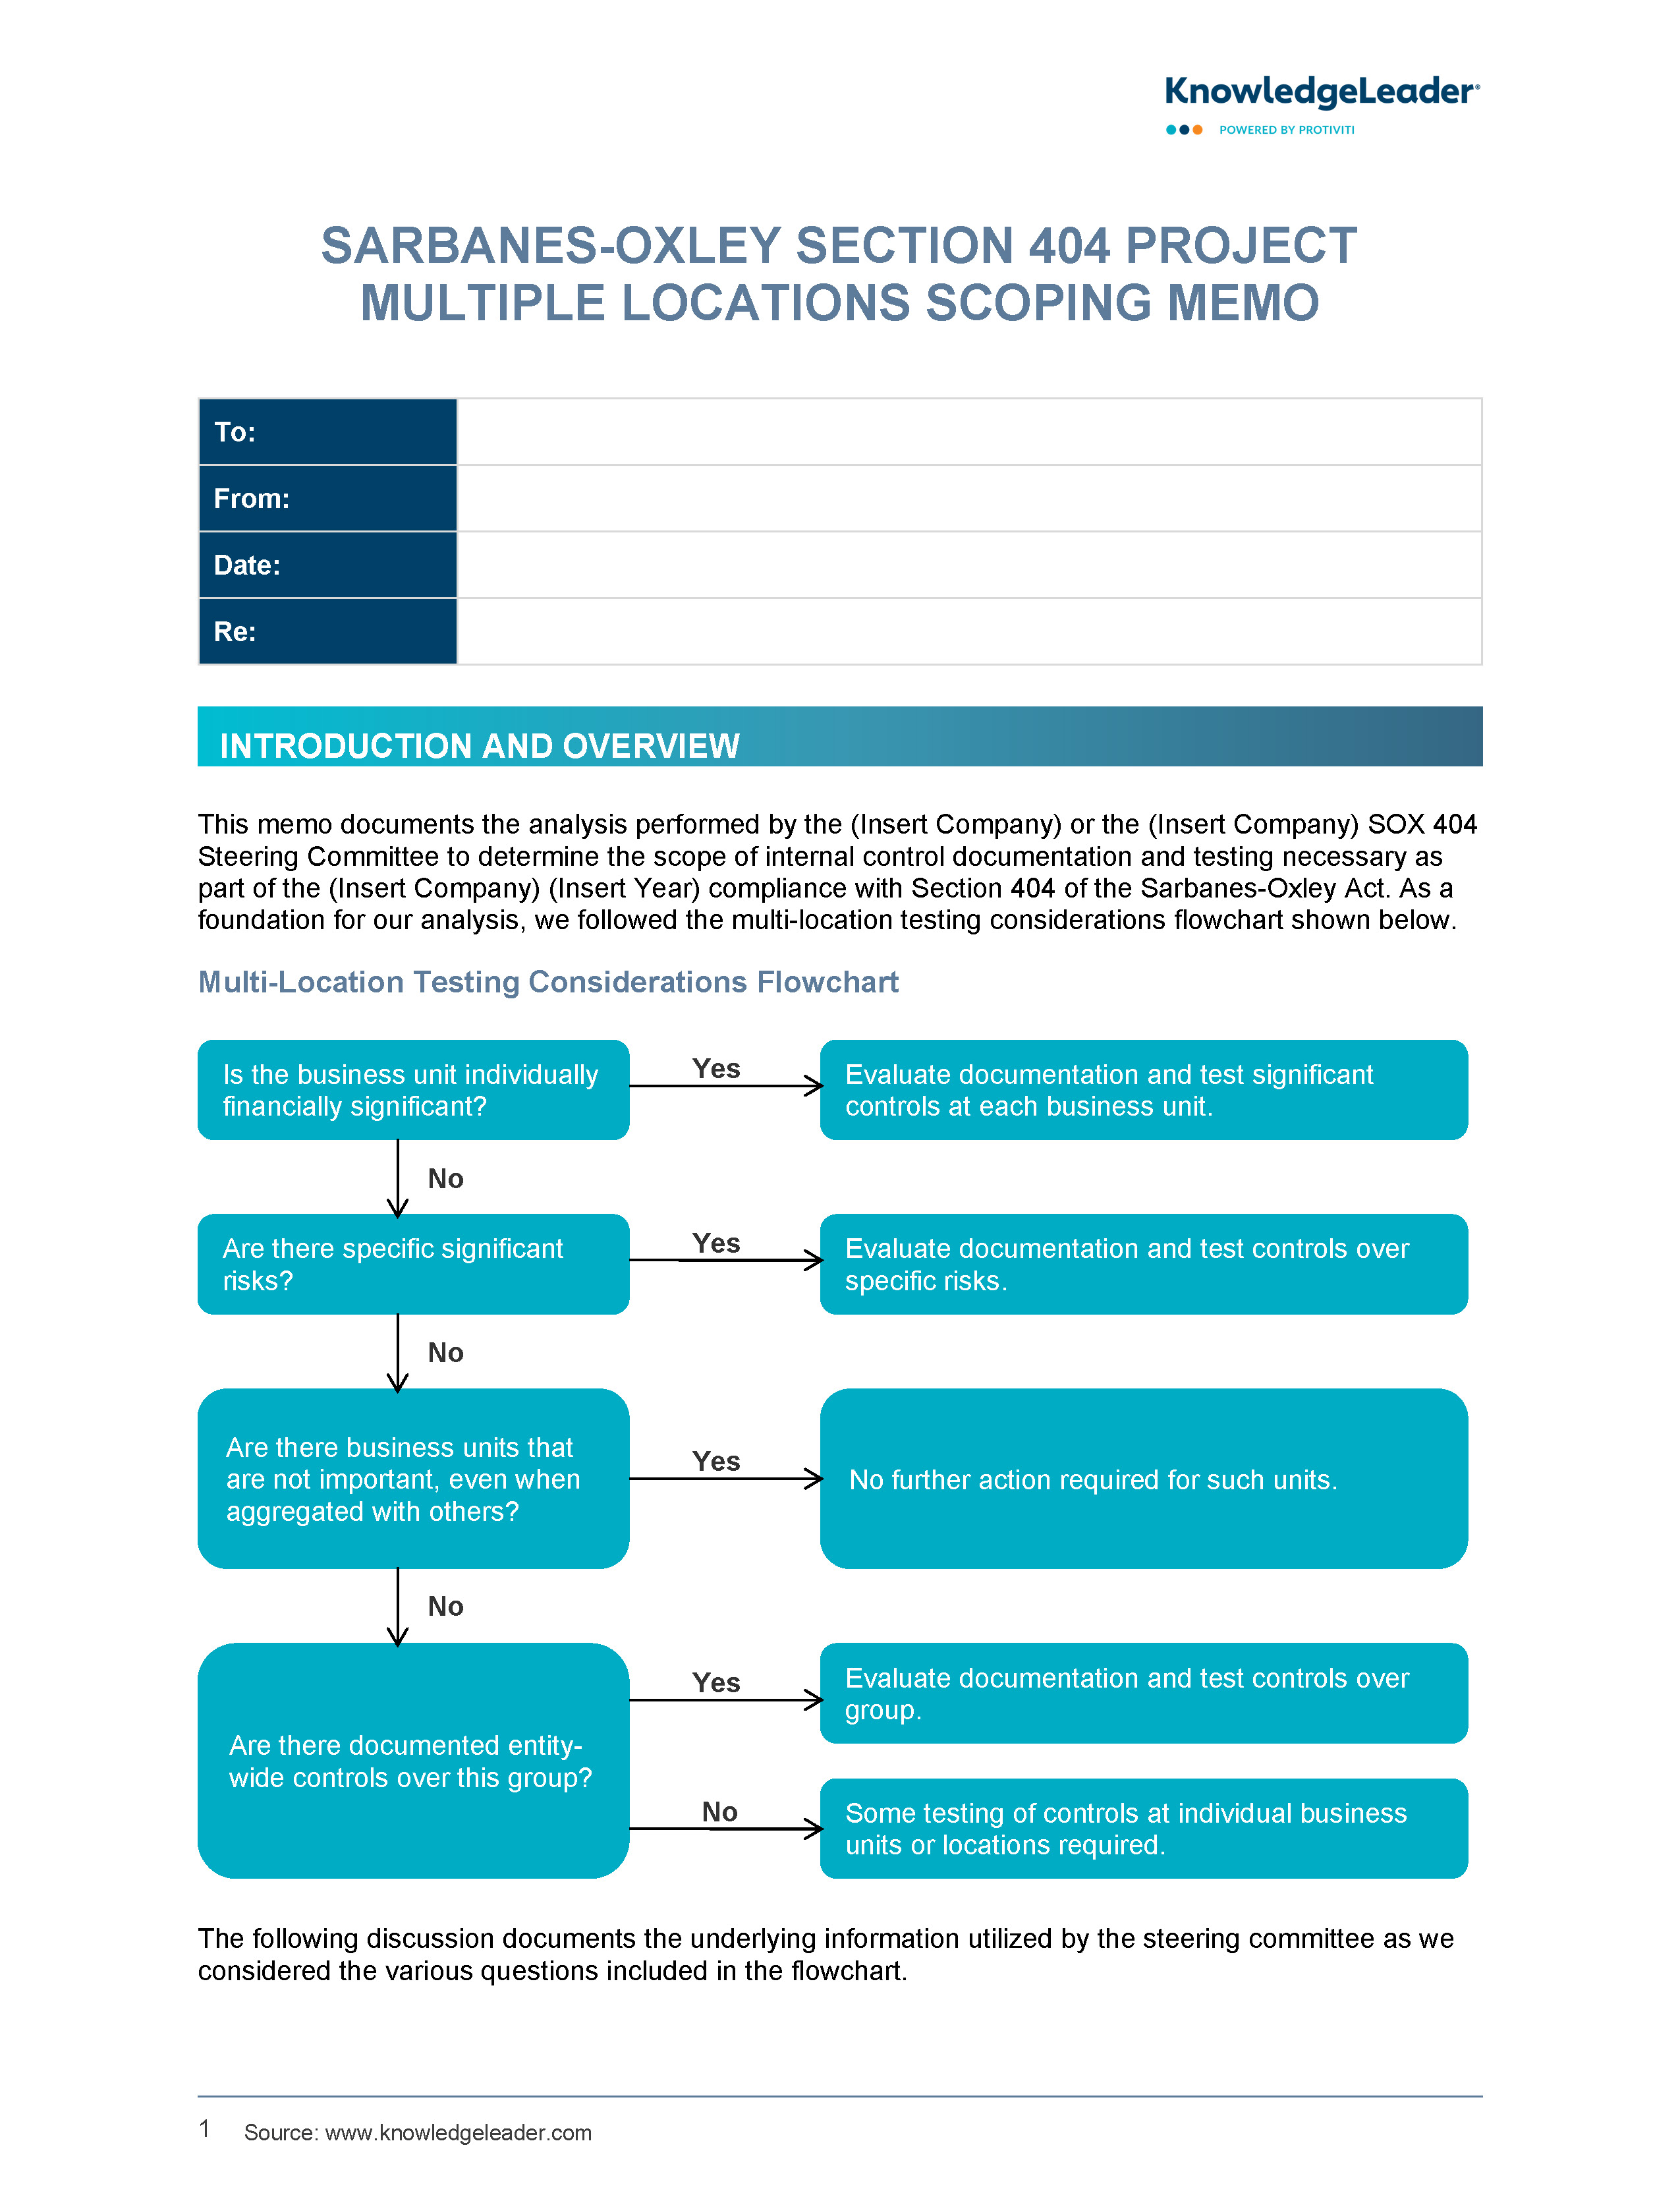 Screenshot of the first page of Sarbanes-Oxley Multiple Locations Scoping Memo